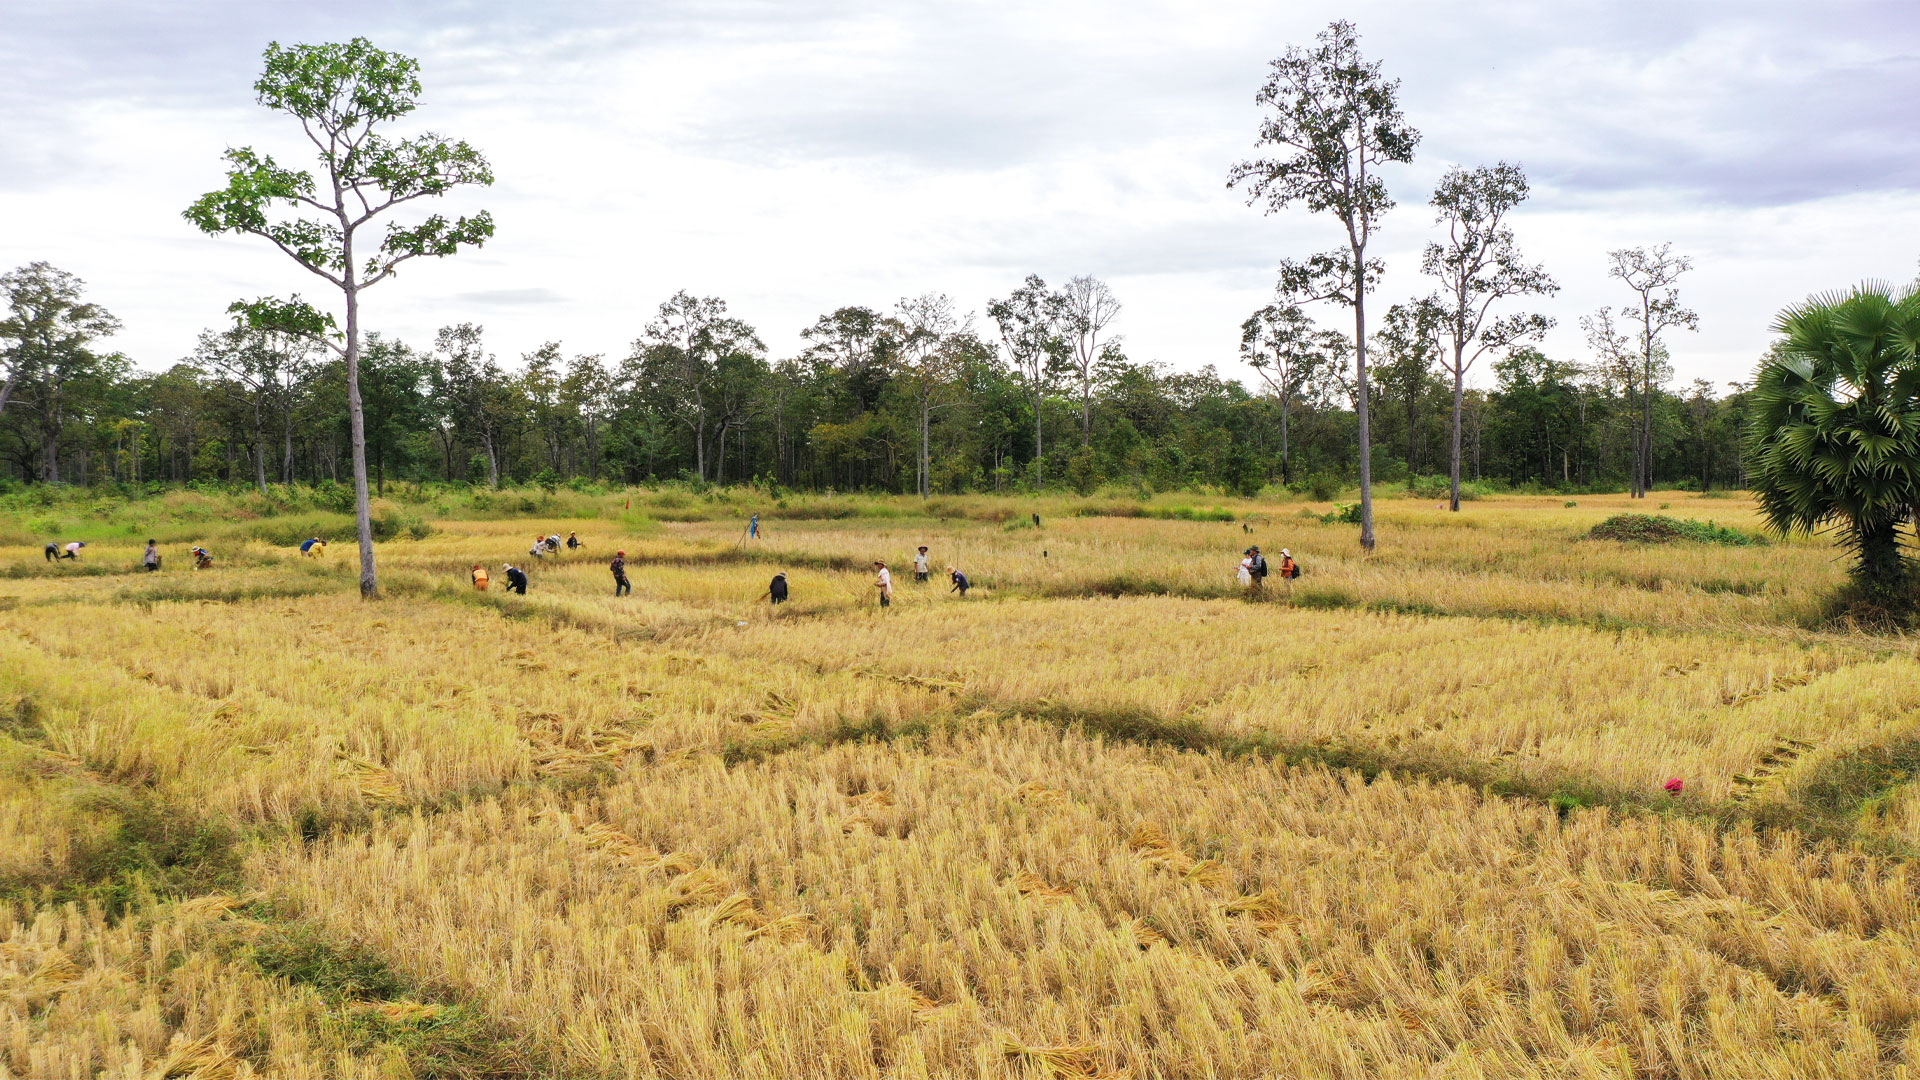 A landscape shot of rice farmers in a field harvesting conservation-friendly rice